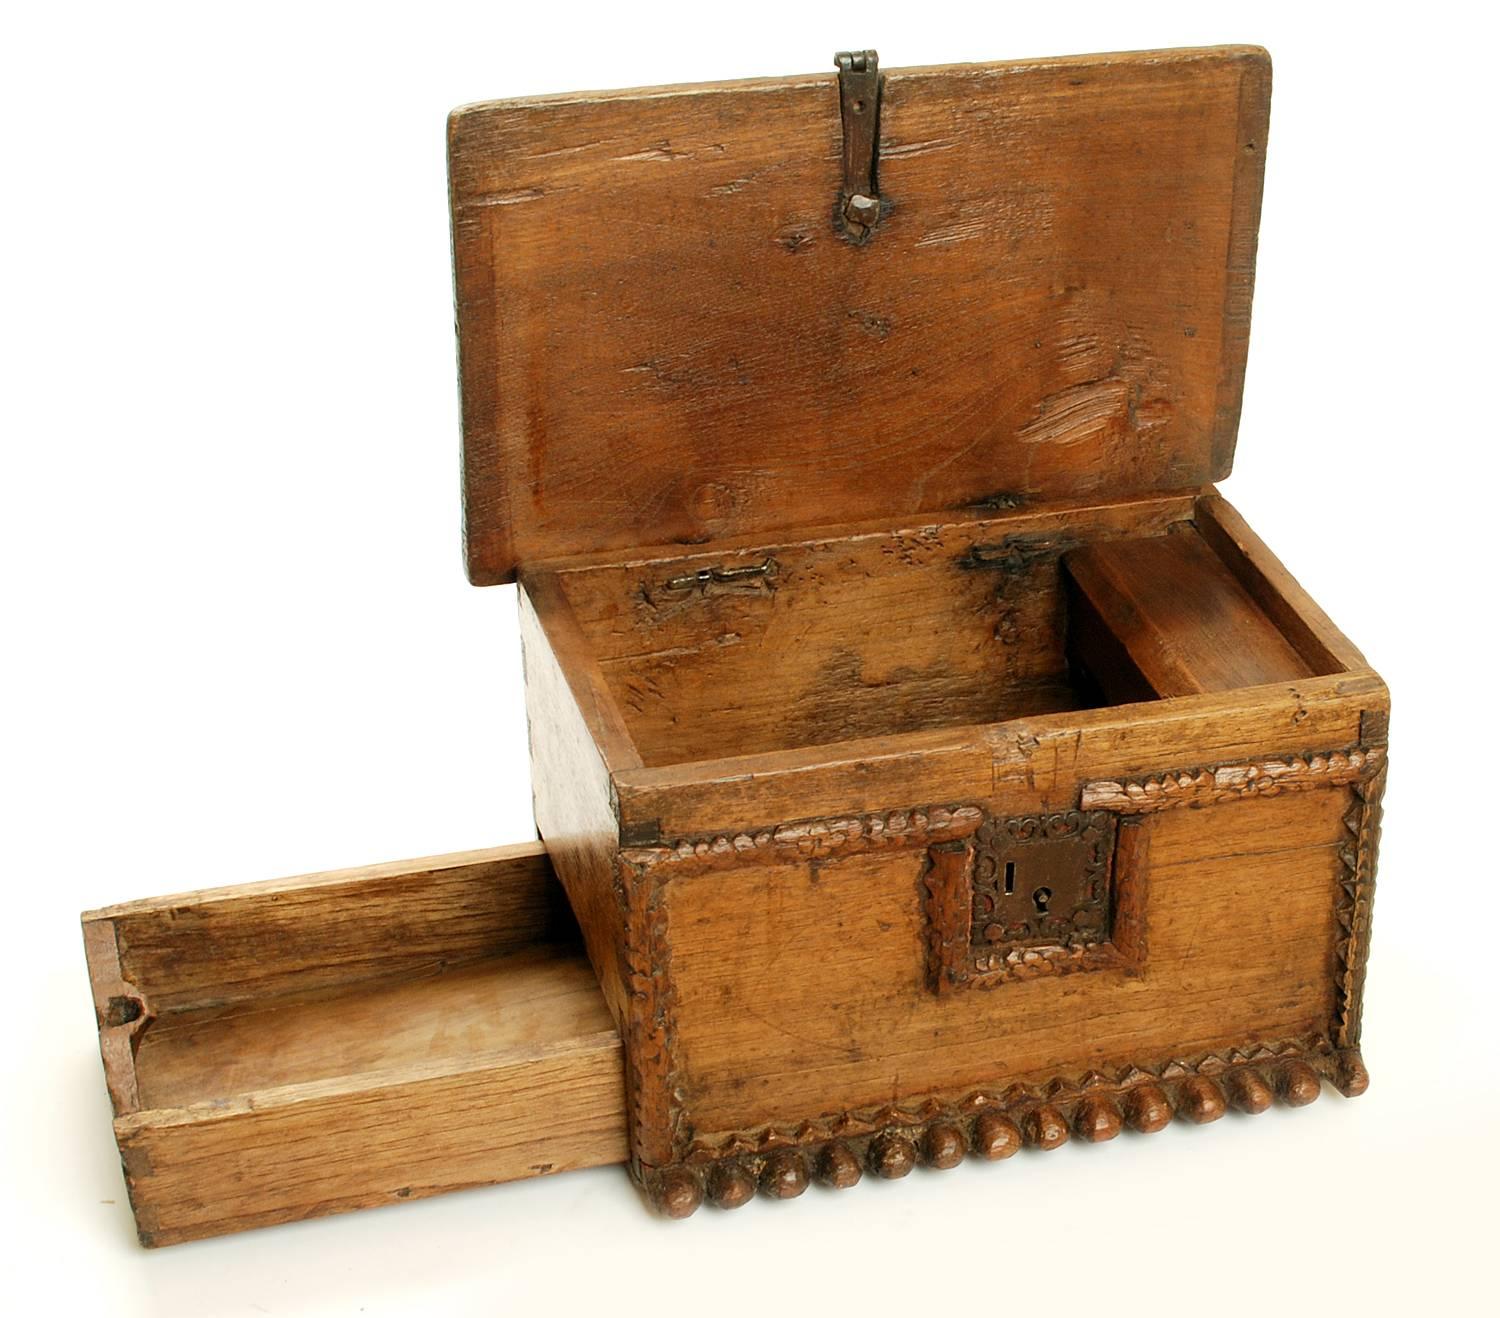 18th Century Spanish Colonial 'Escribania' or 'Document Box' In Excellent Condition For Sale In San Francisco, CA